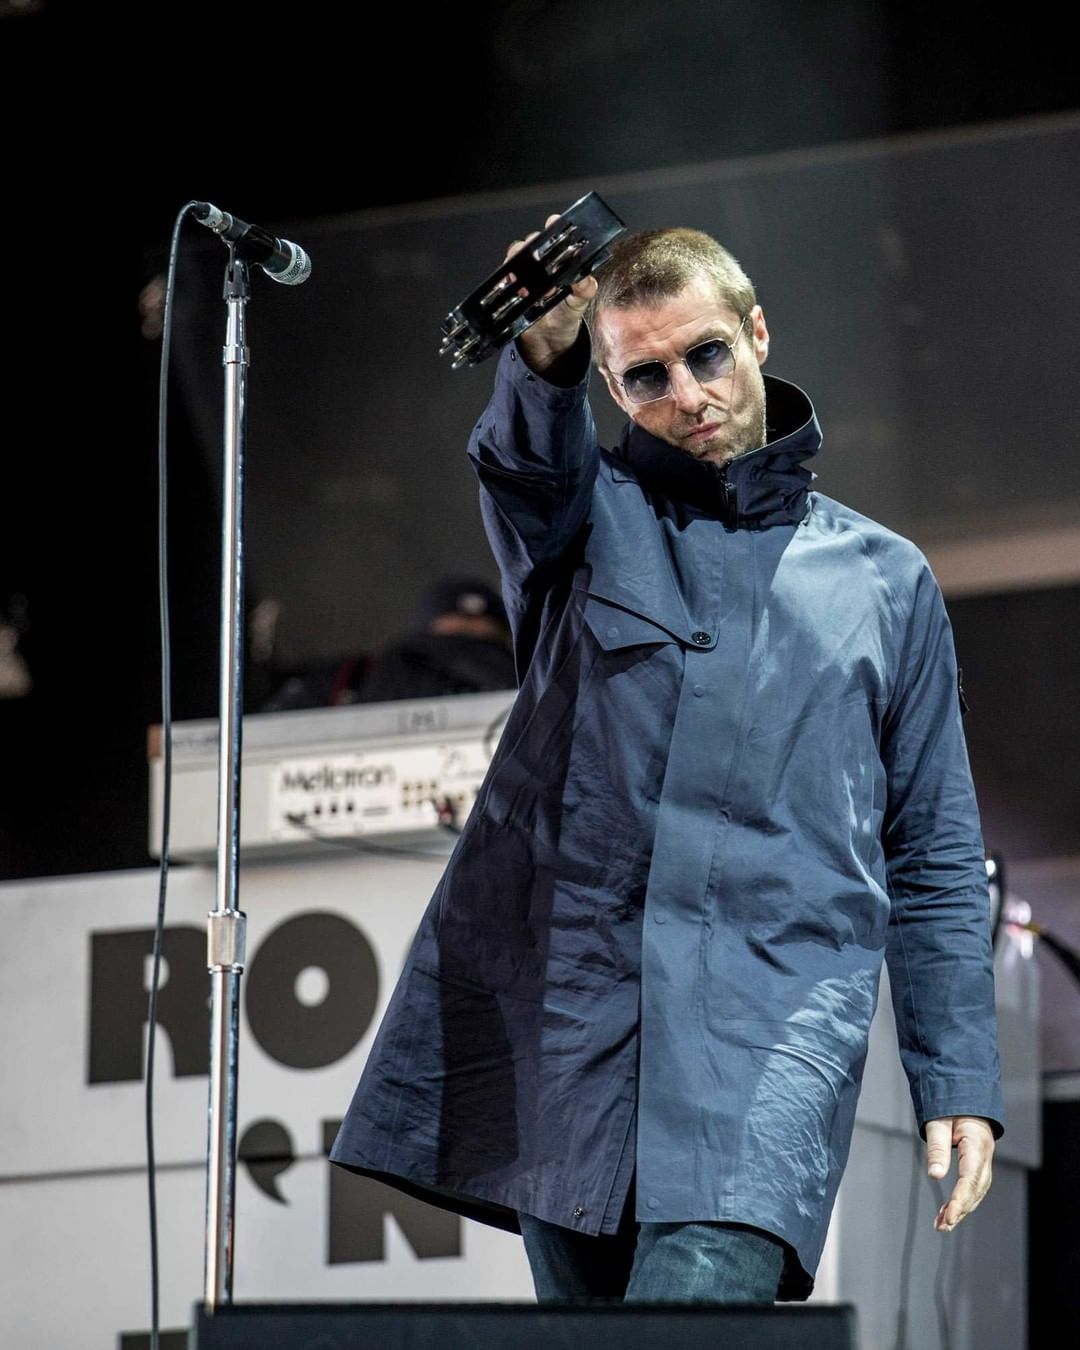 Happy 49 birthday to Oasis singer Liam Gallagher! 